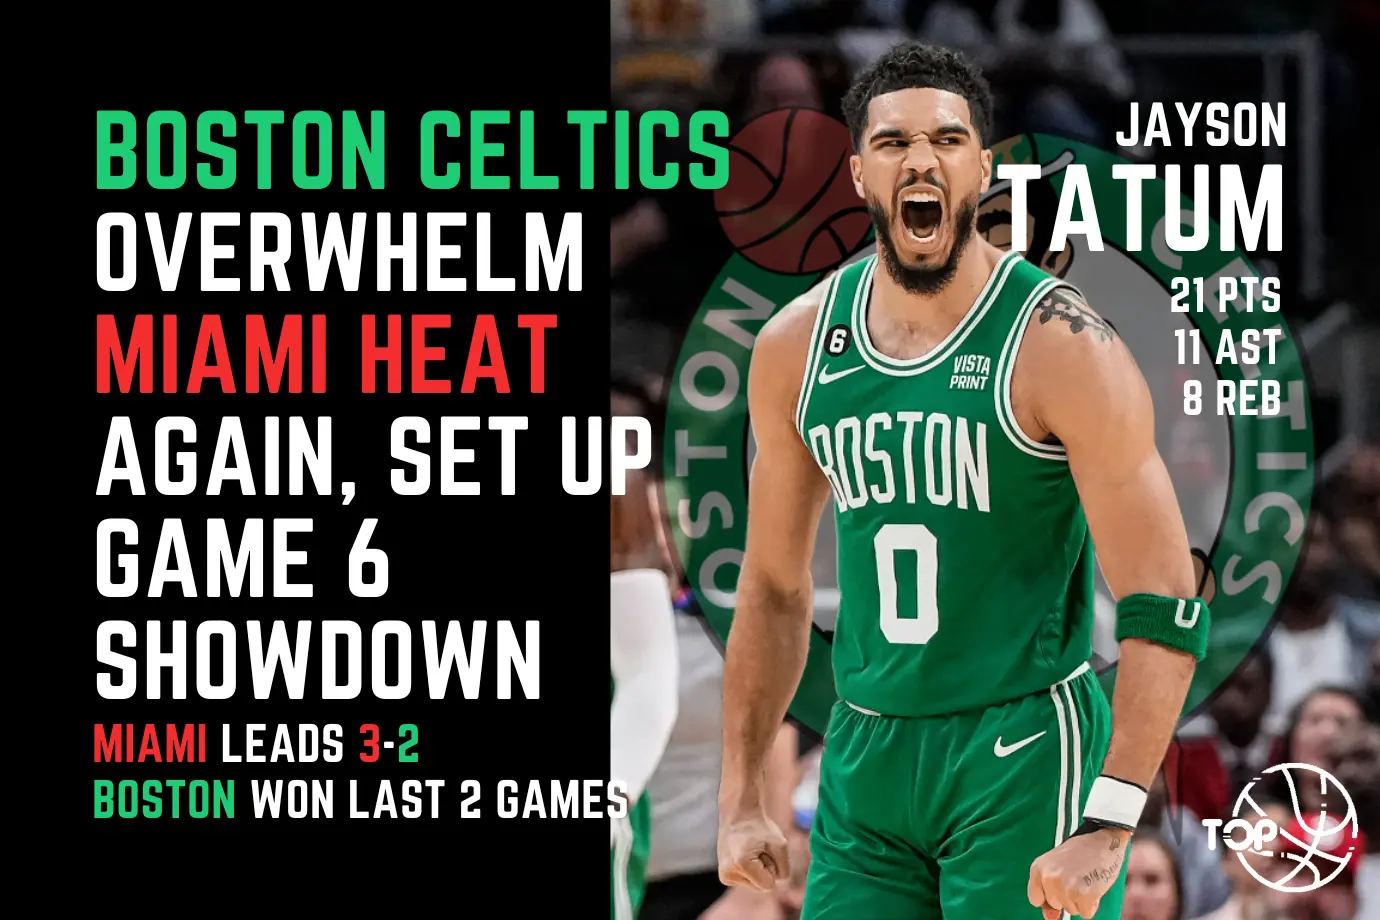 Boston Celtics Overwhelm Miami Heat Again, Set Up Game 6 Showdown in Eastern Conference Finals